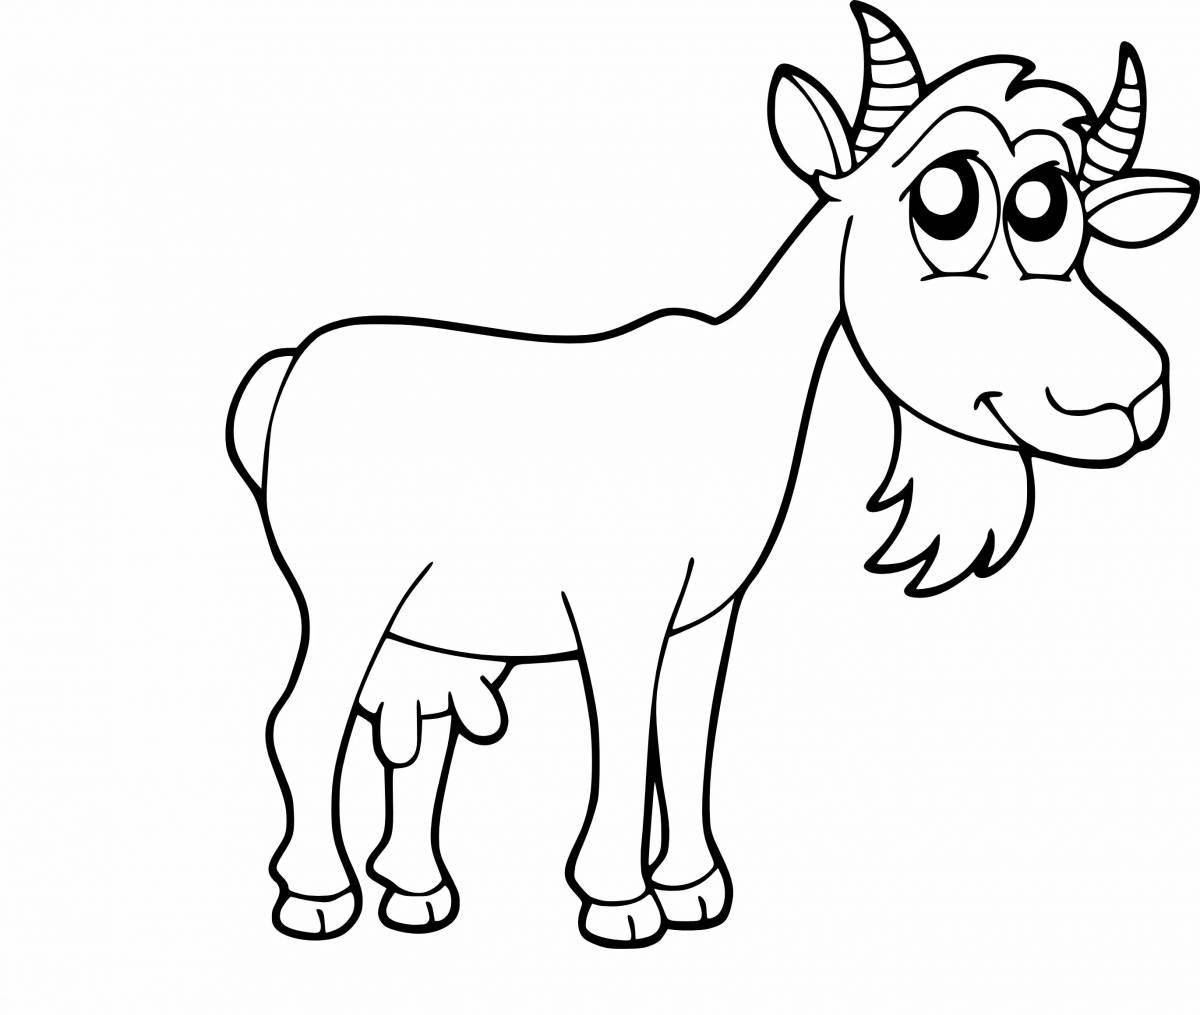 Fabulous goat coloring page for kids